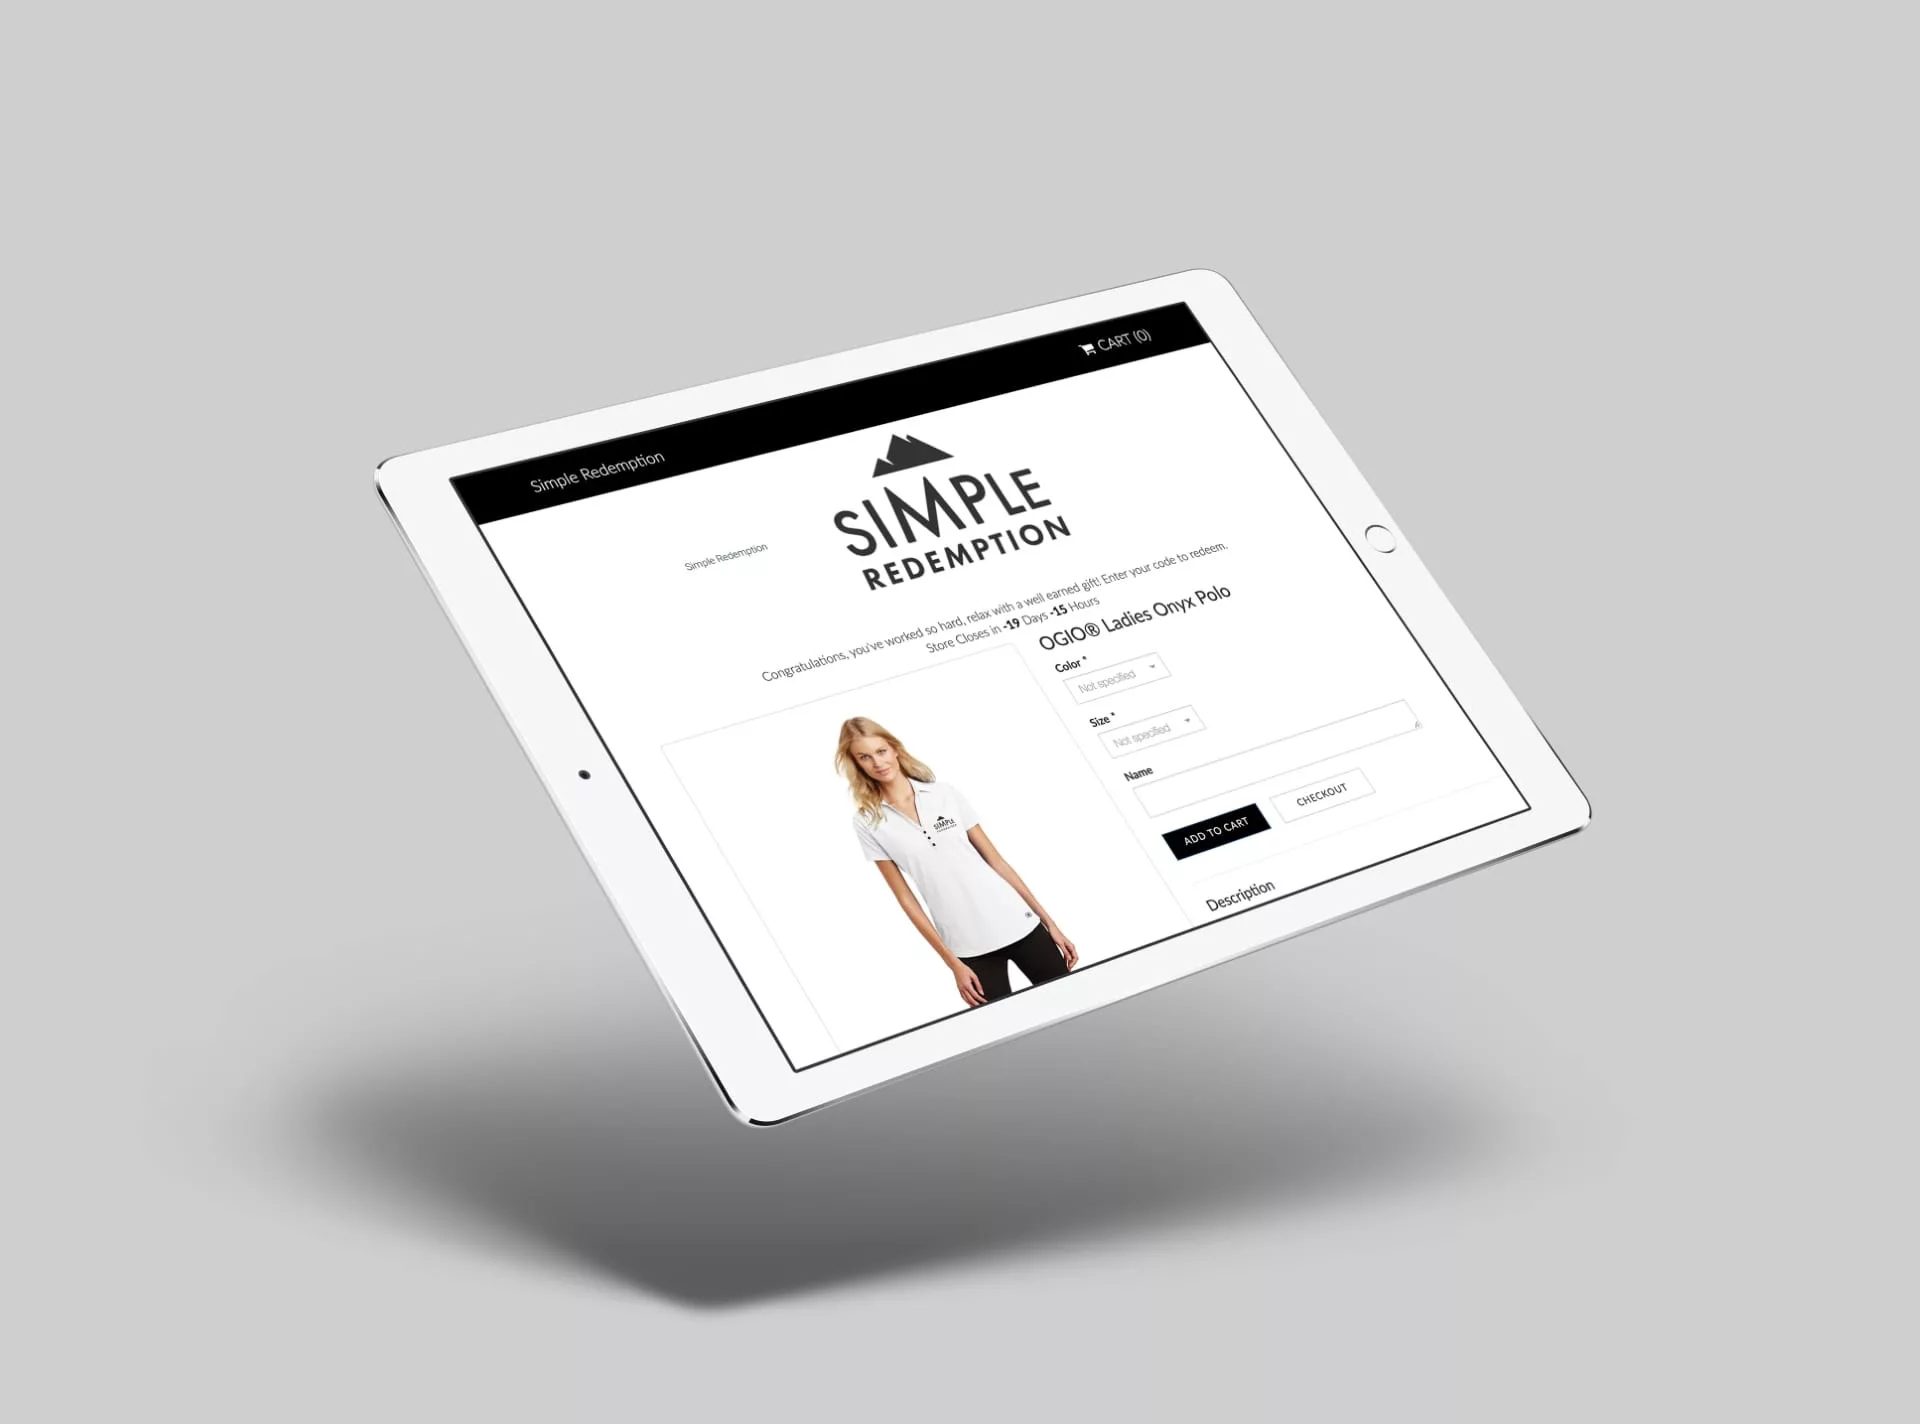 Mockup of the Simple Redemption website on a tablet